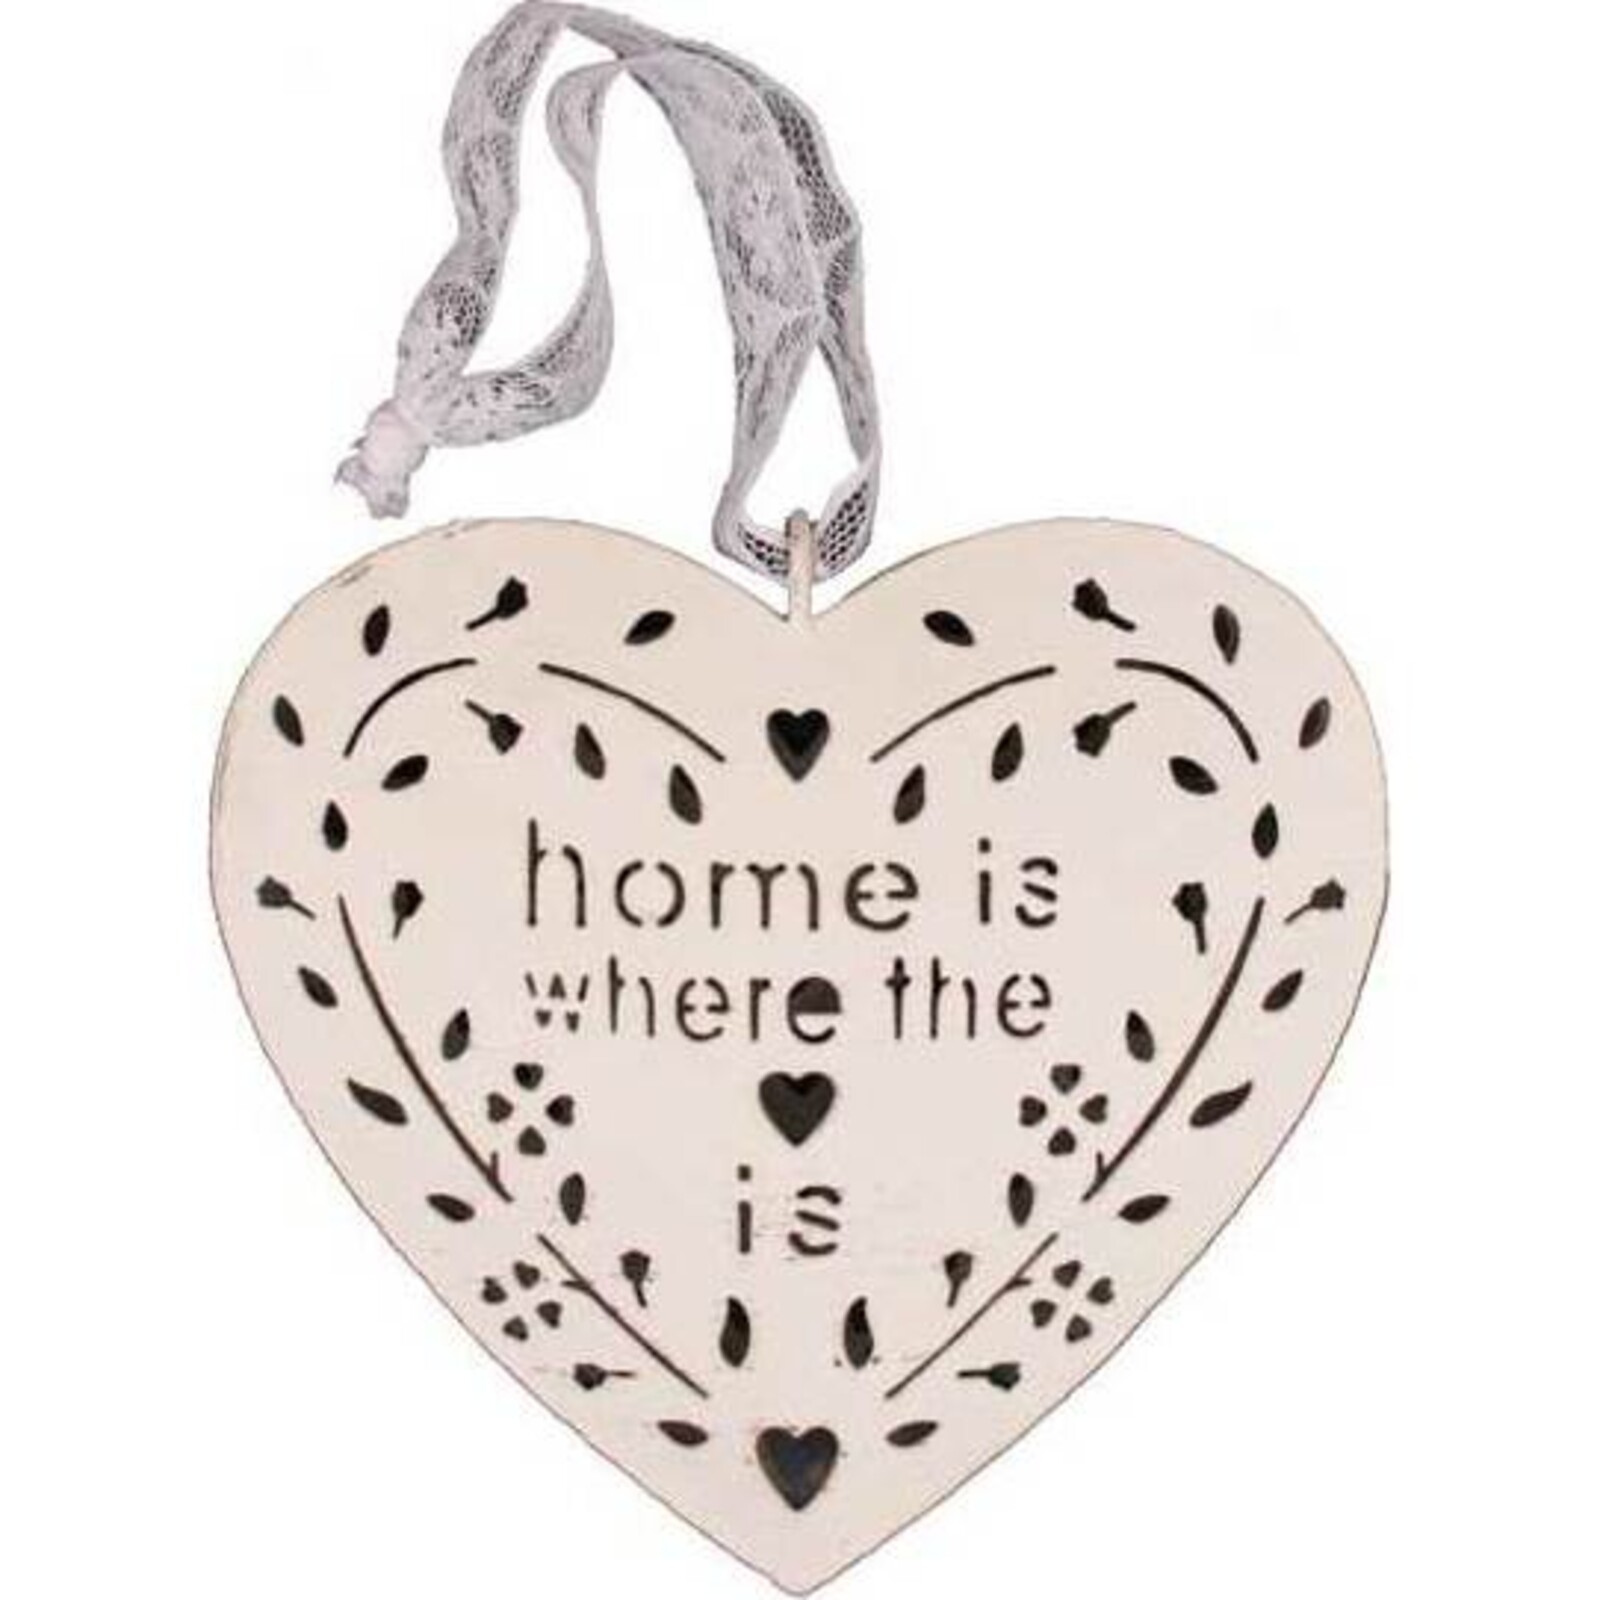 Hanging Heart - Home Small